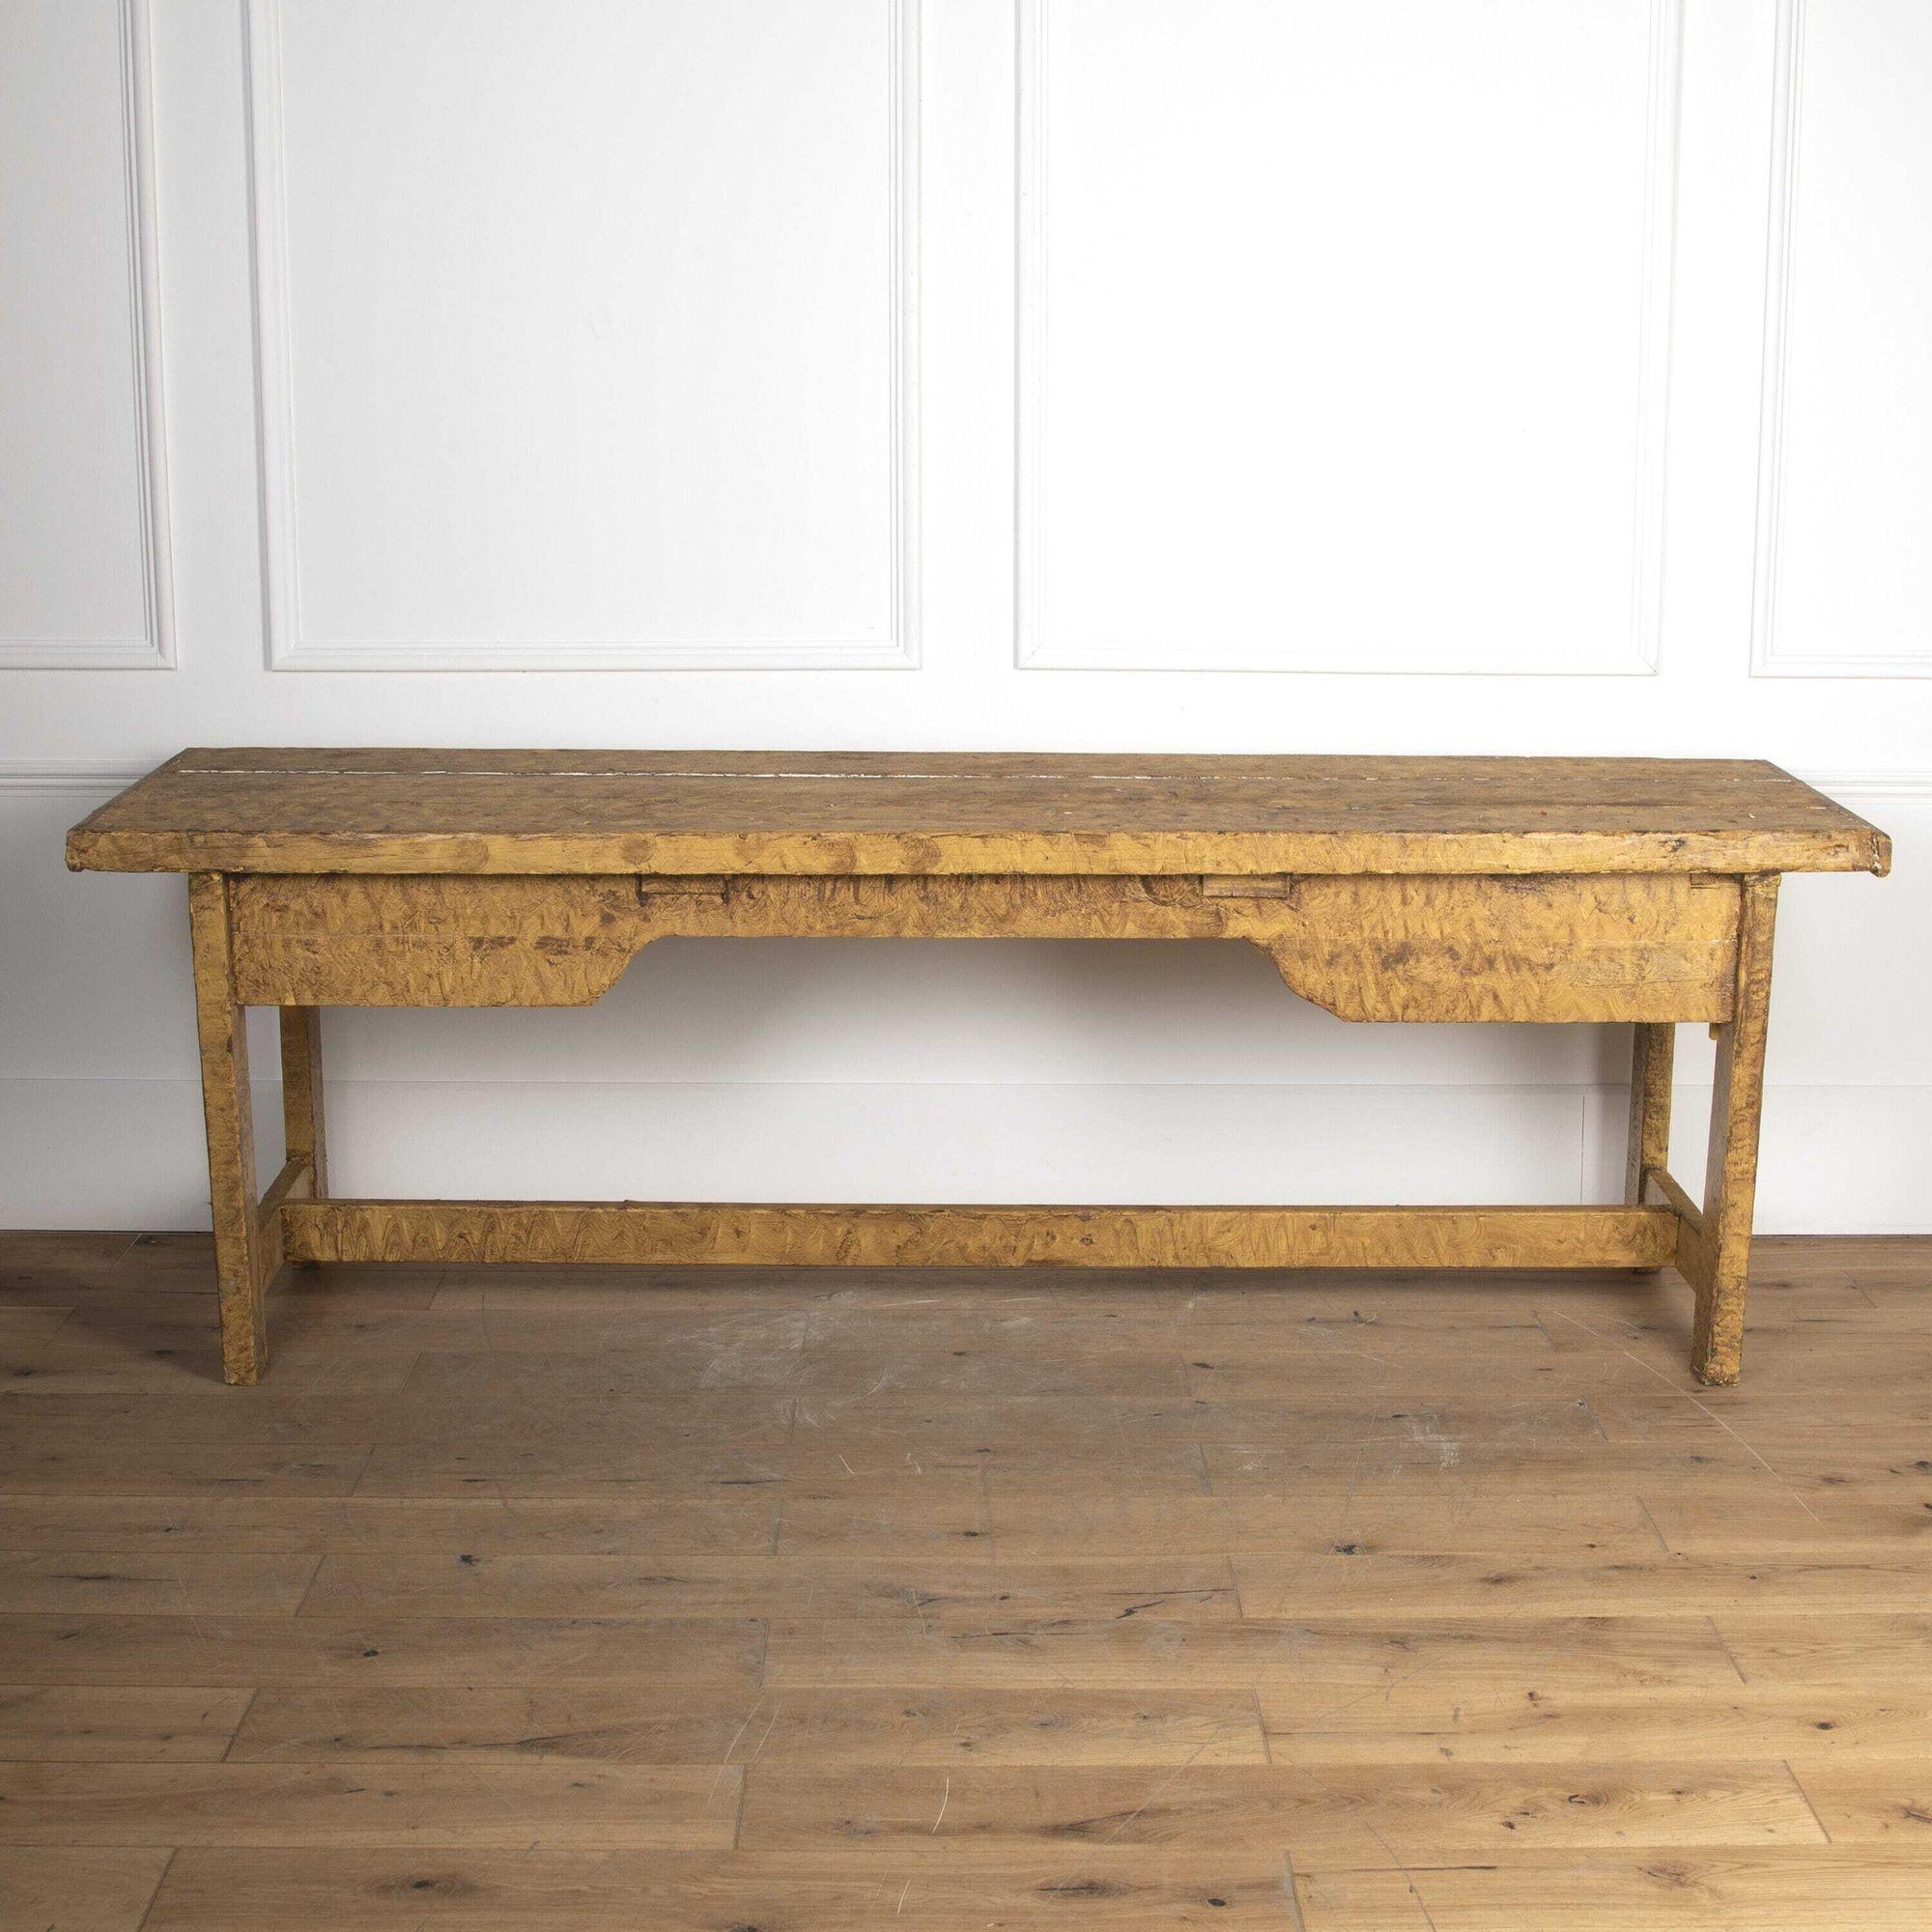 Beautiful 19th century table on square legs with its original paintwork.
Features carved-out side stretchers that are in a sound condition and support the table as a whole, wonderfully. 
This table will make for both a great console and dining